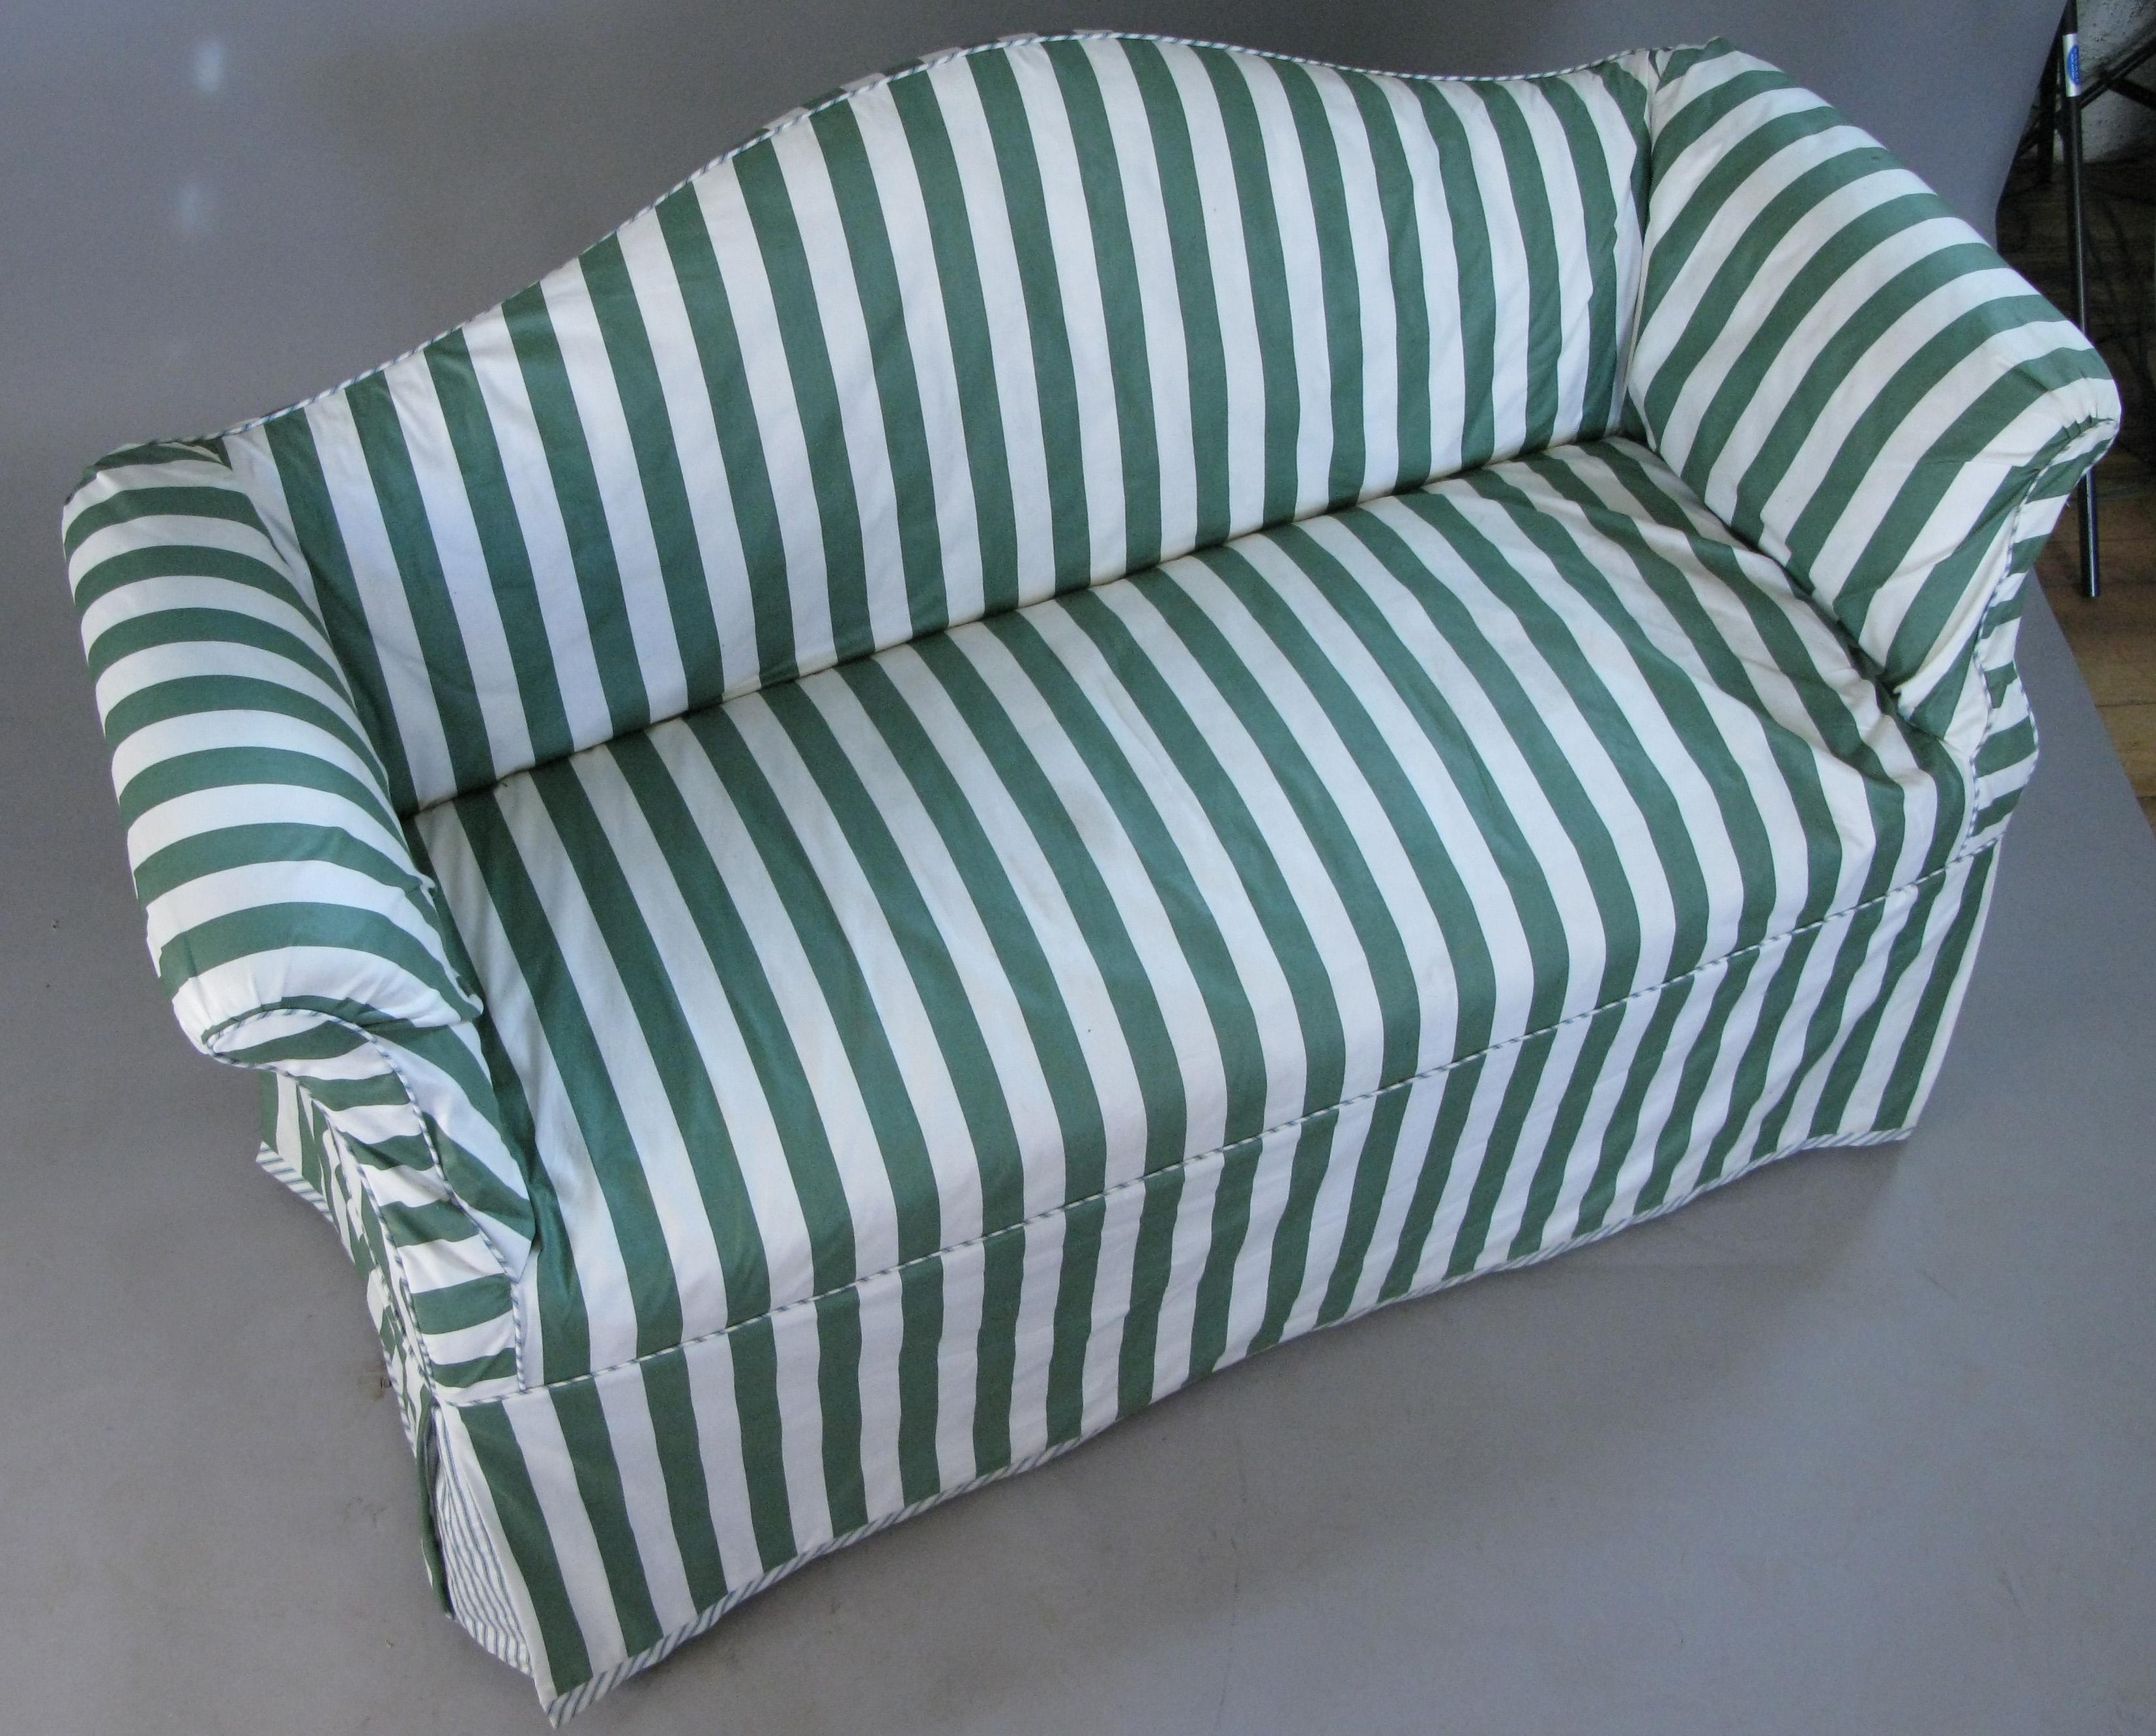 American Pair of Petite Camelback Settees with Slipcovers in Green & White